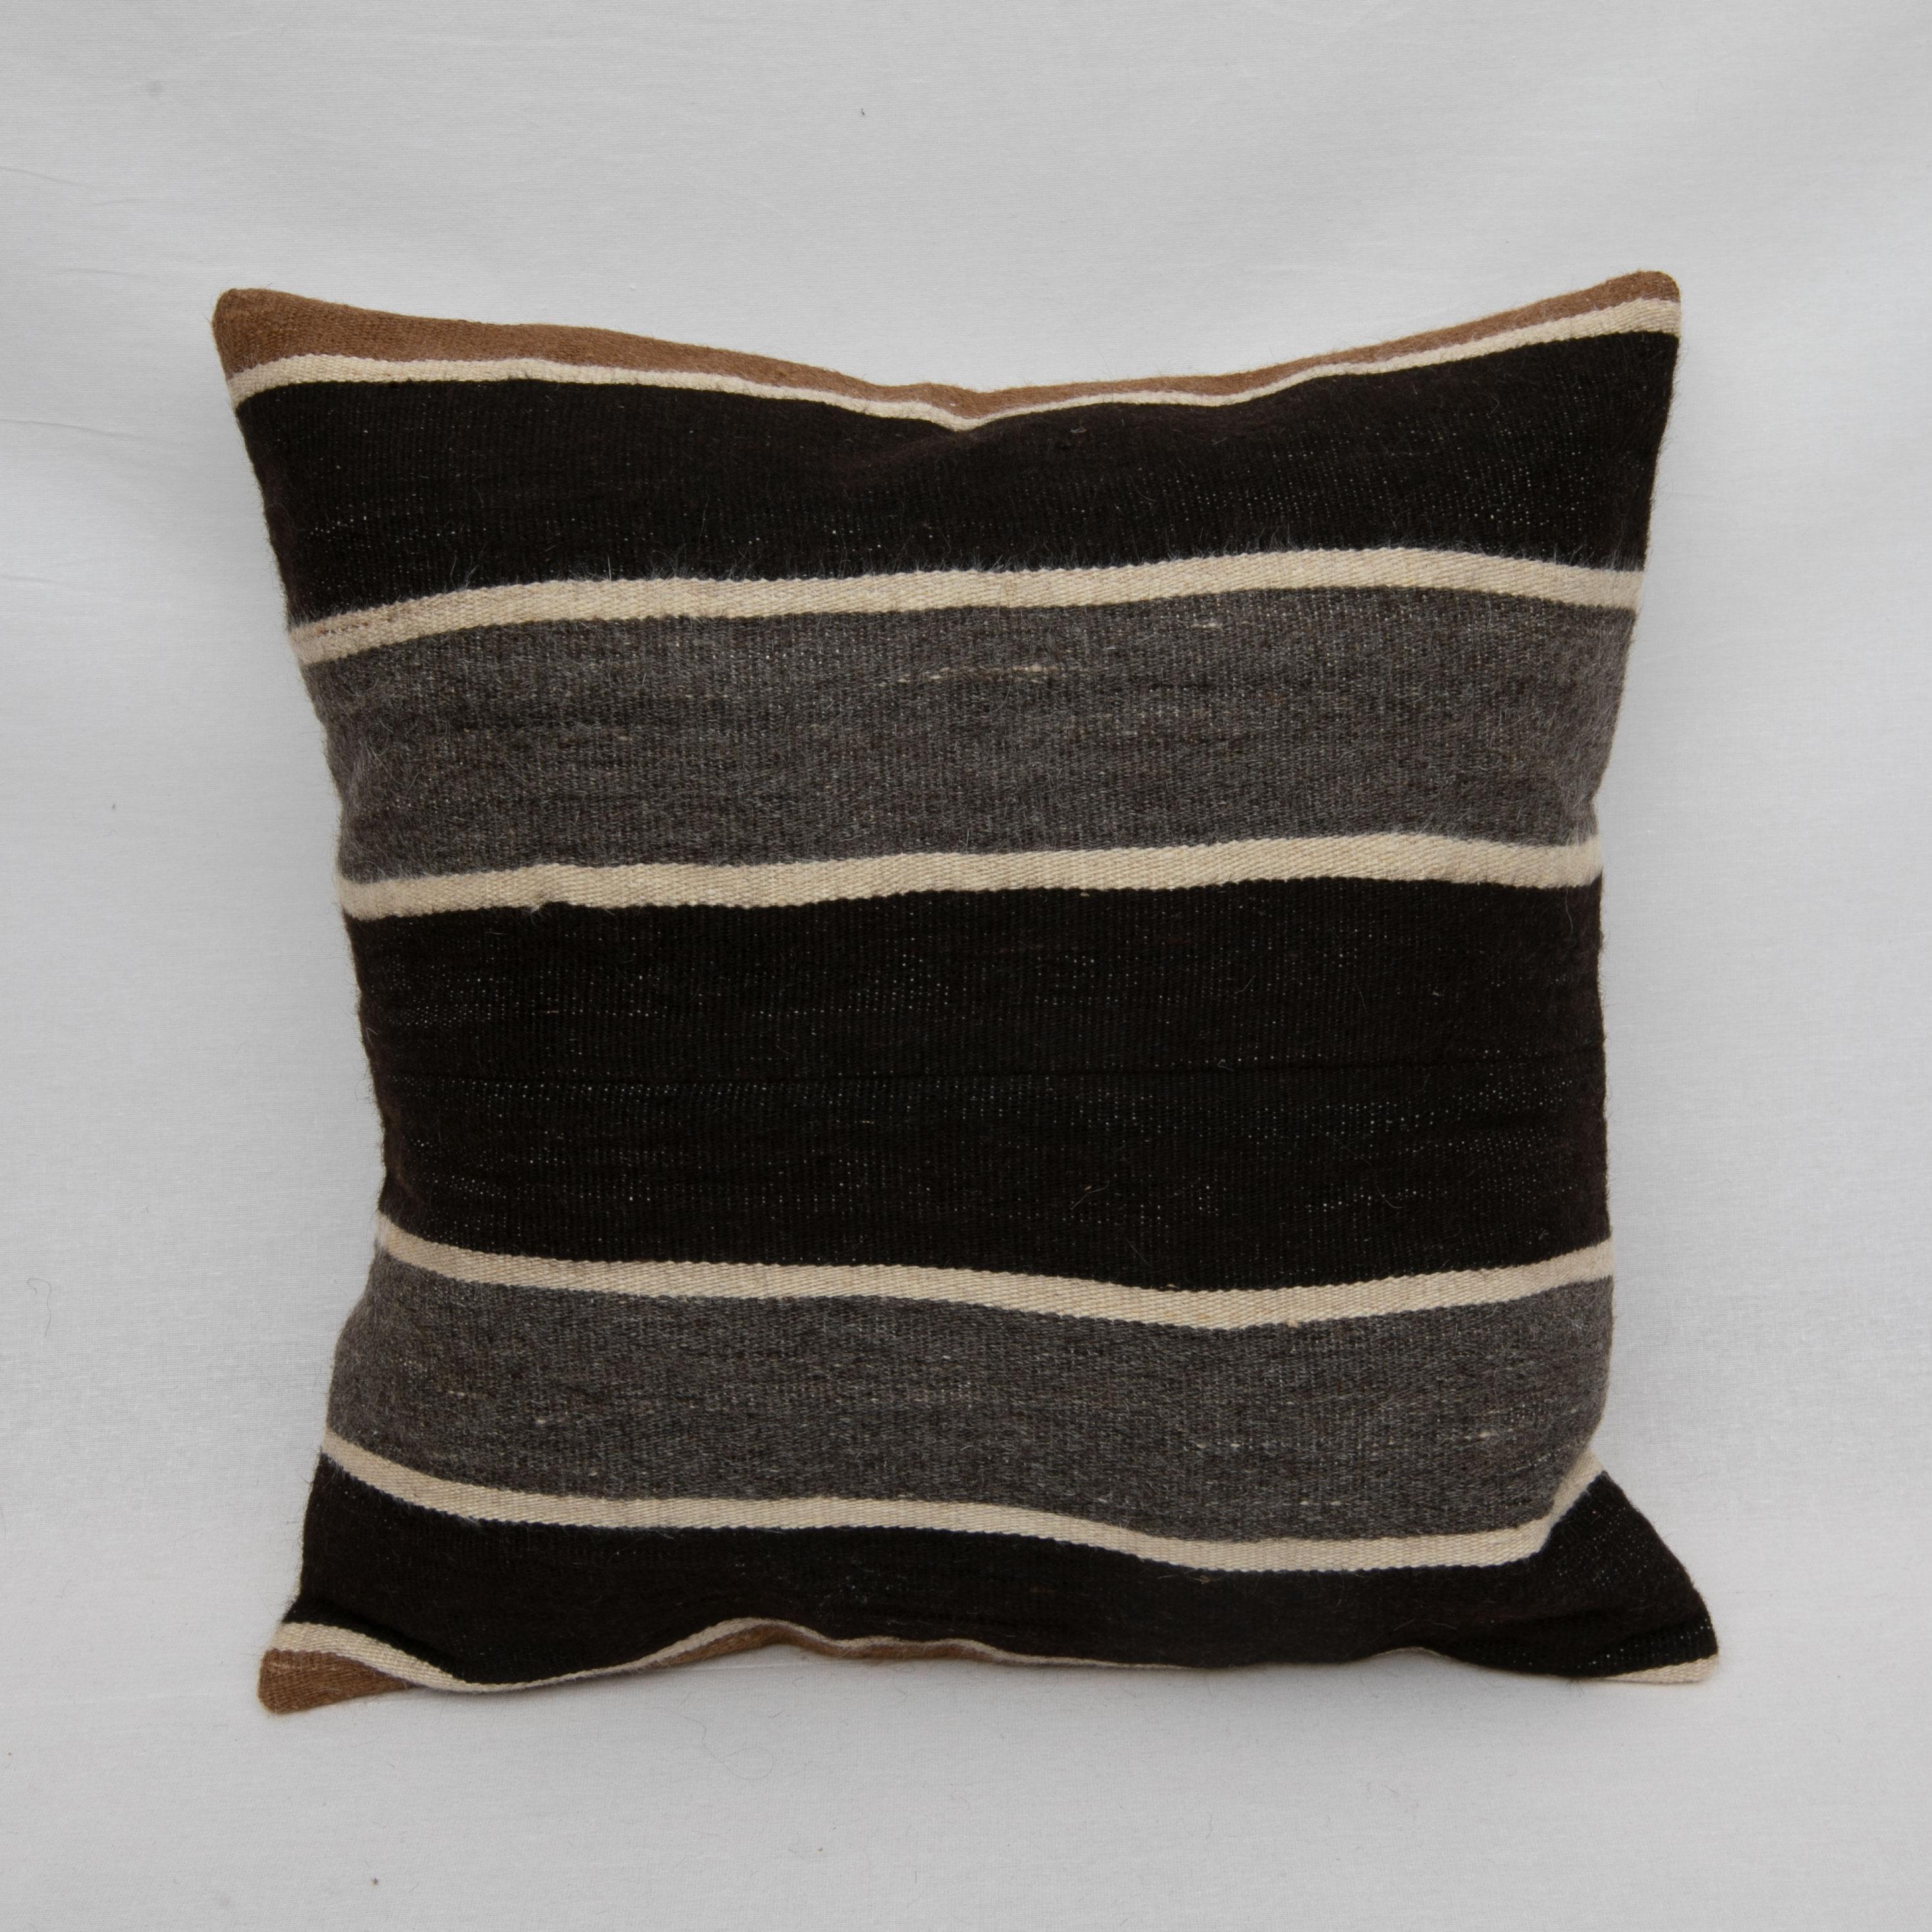 These pillows are made from vintage Angora Siirt (a city in the South East of Turkey) .
Siirt is famous for these blankets made from the hair of angora goat. Angora is believed to name after the capital city of Turkey, Ankara or the opposite.
We